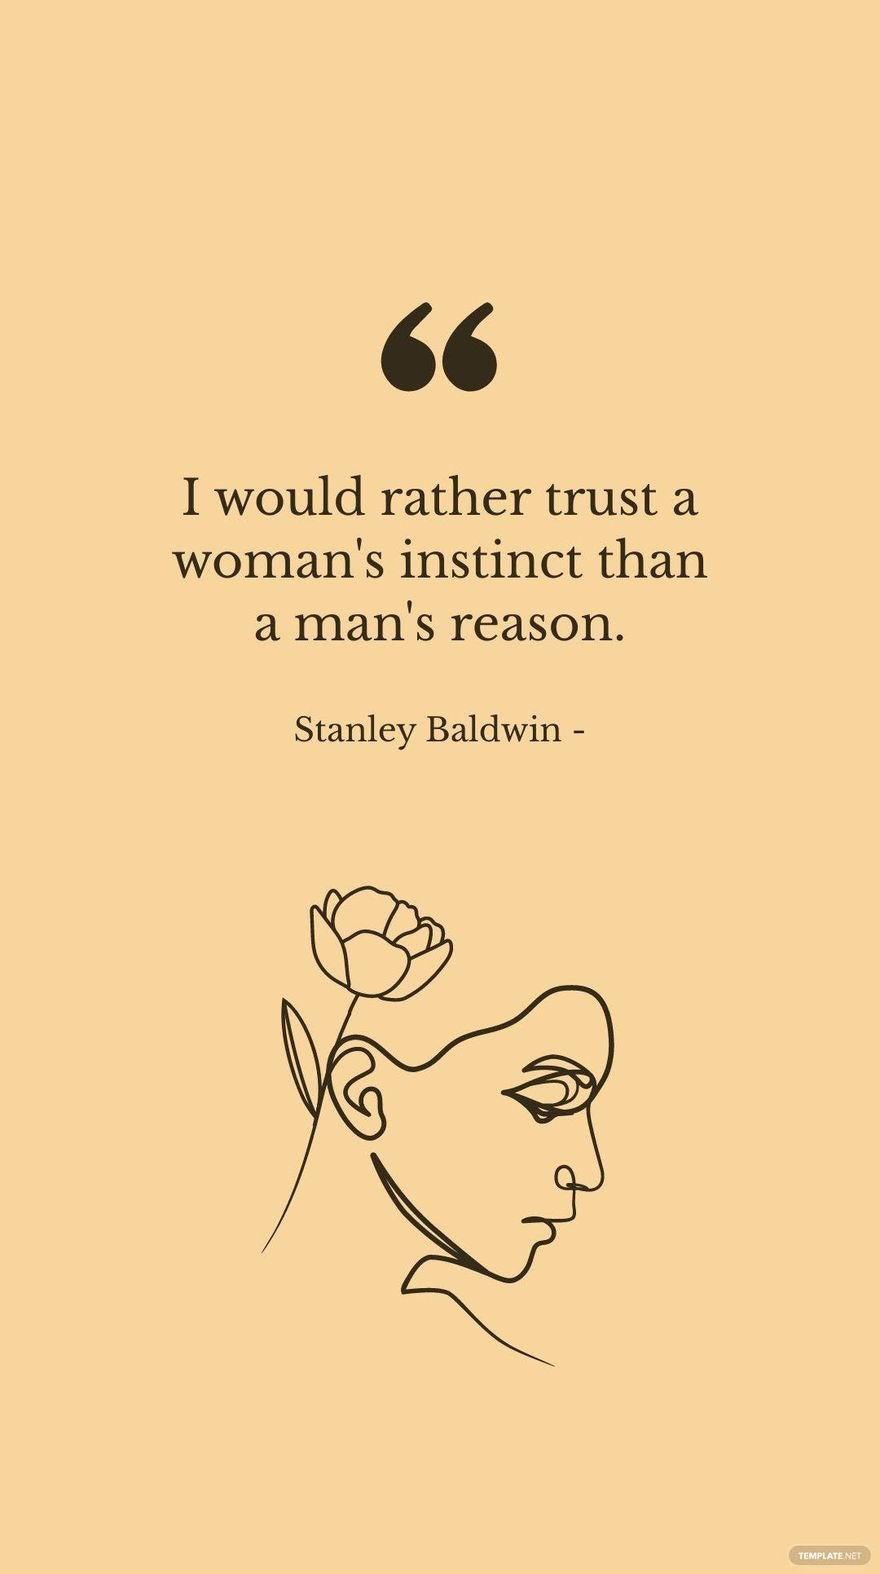 Stanley Baldwin - I would rather trust a woman's instinct than a man's reason. in JPG